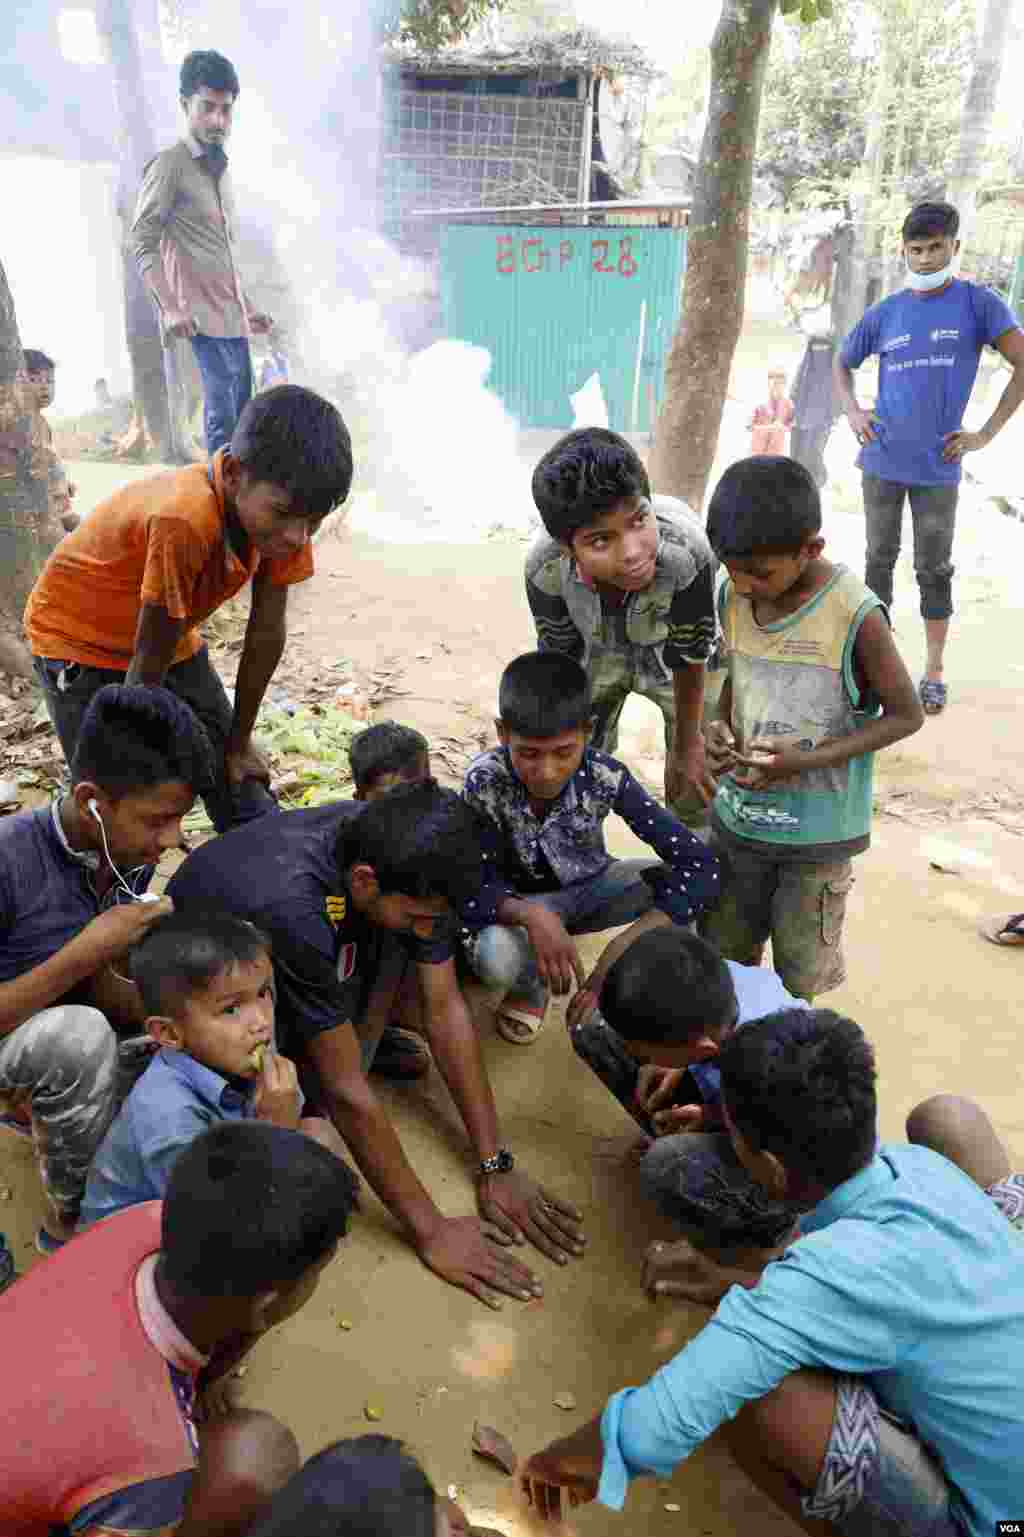 Rohingya refugees spin and flip the coins for a game in Kutupalong camp Mar. 31, 2019. (Hai Do/VOA)